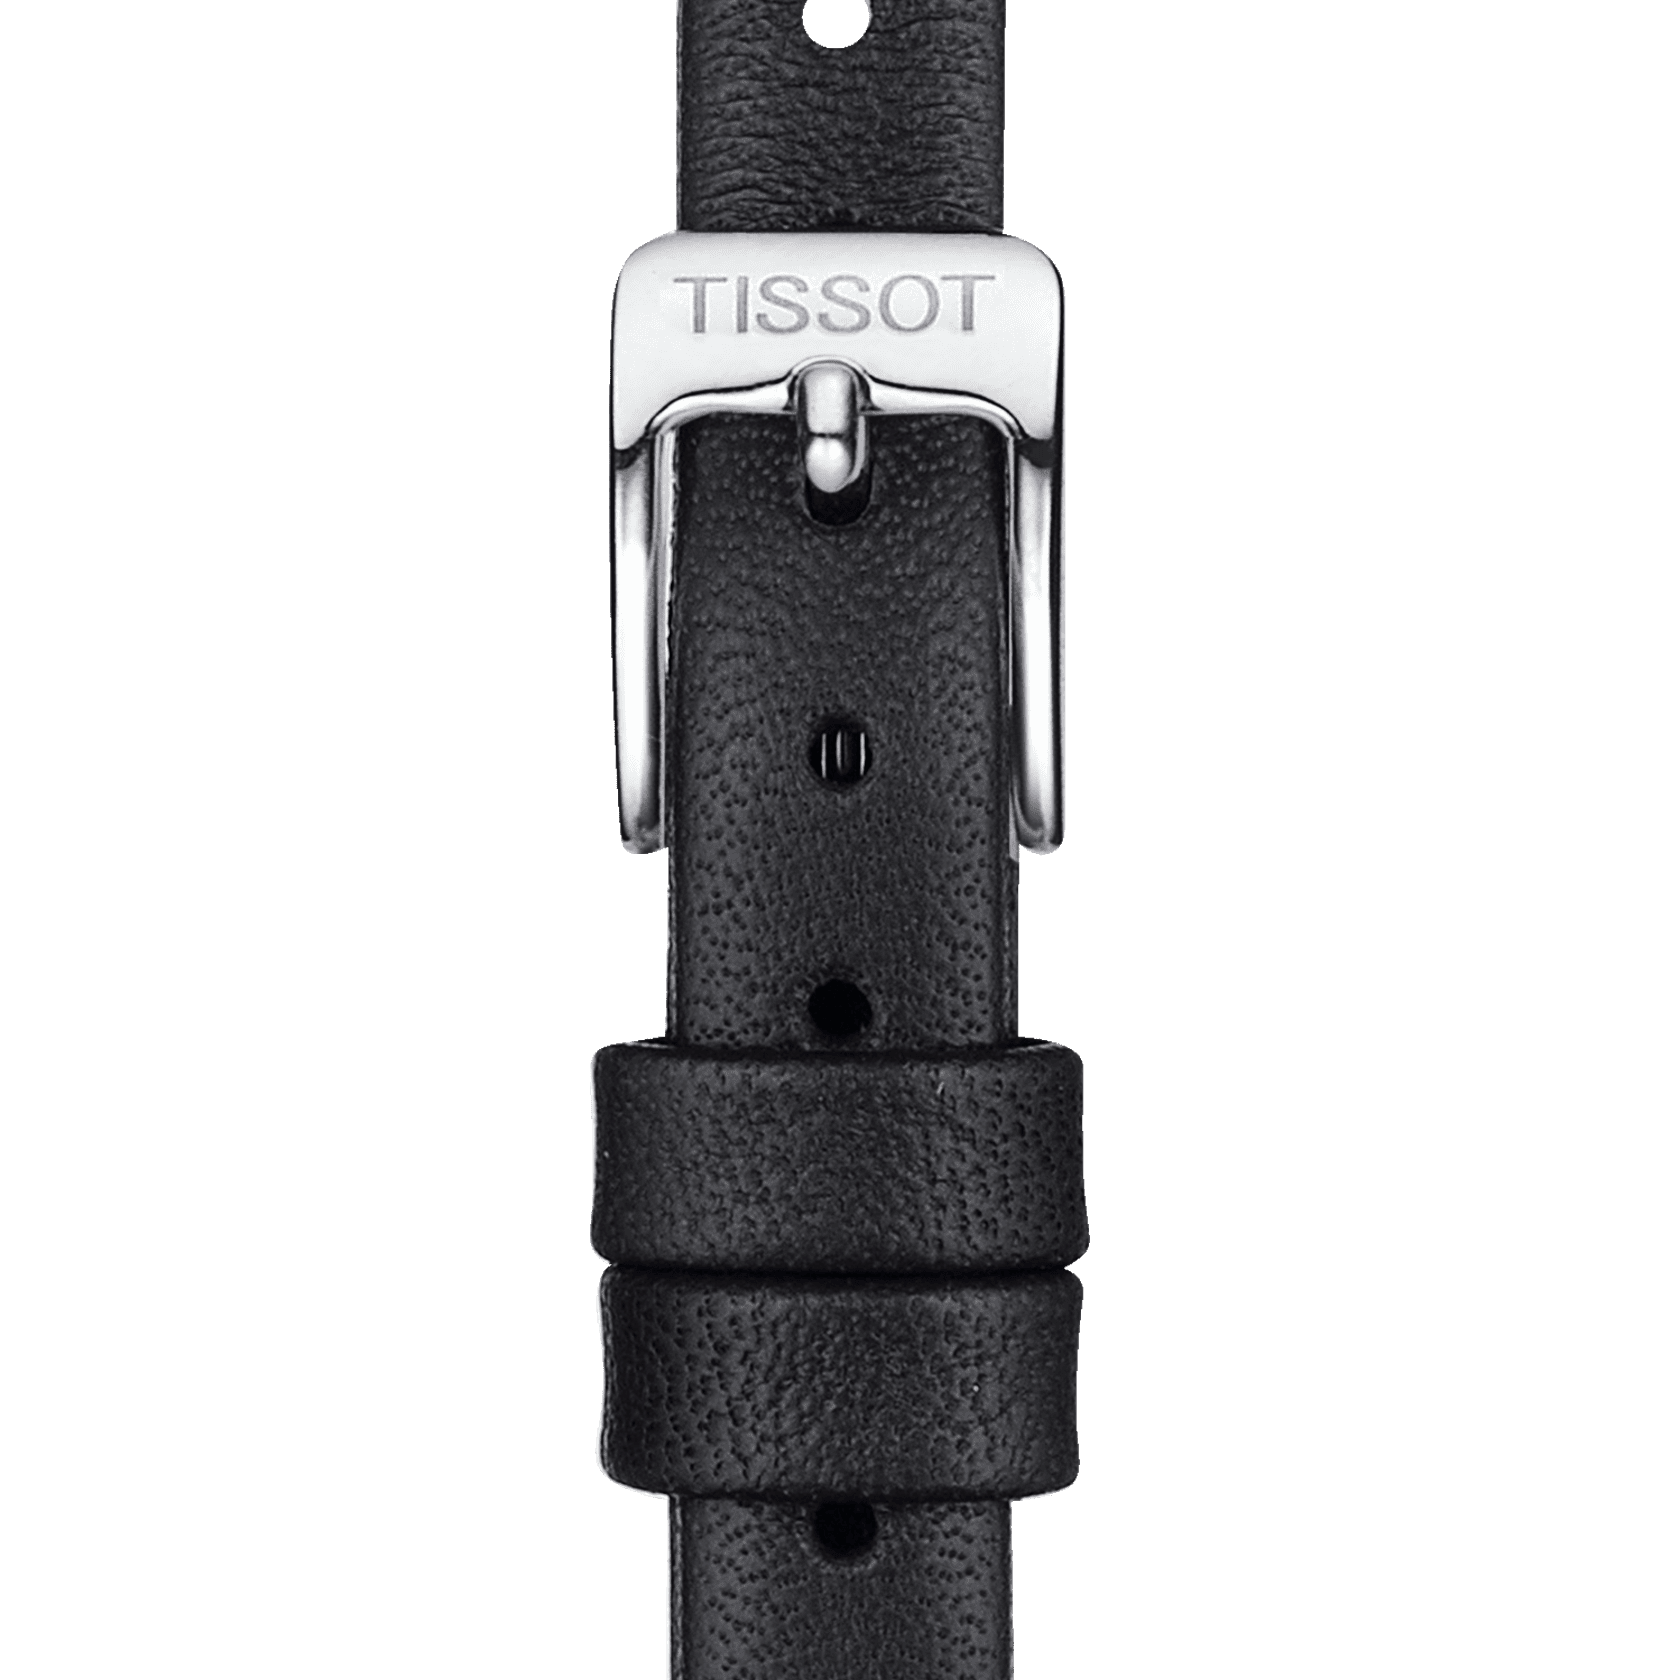 Tissot official black leather strap lugs 09 mm